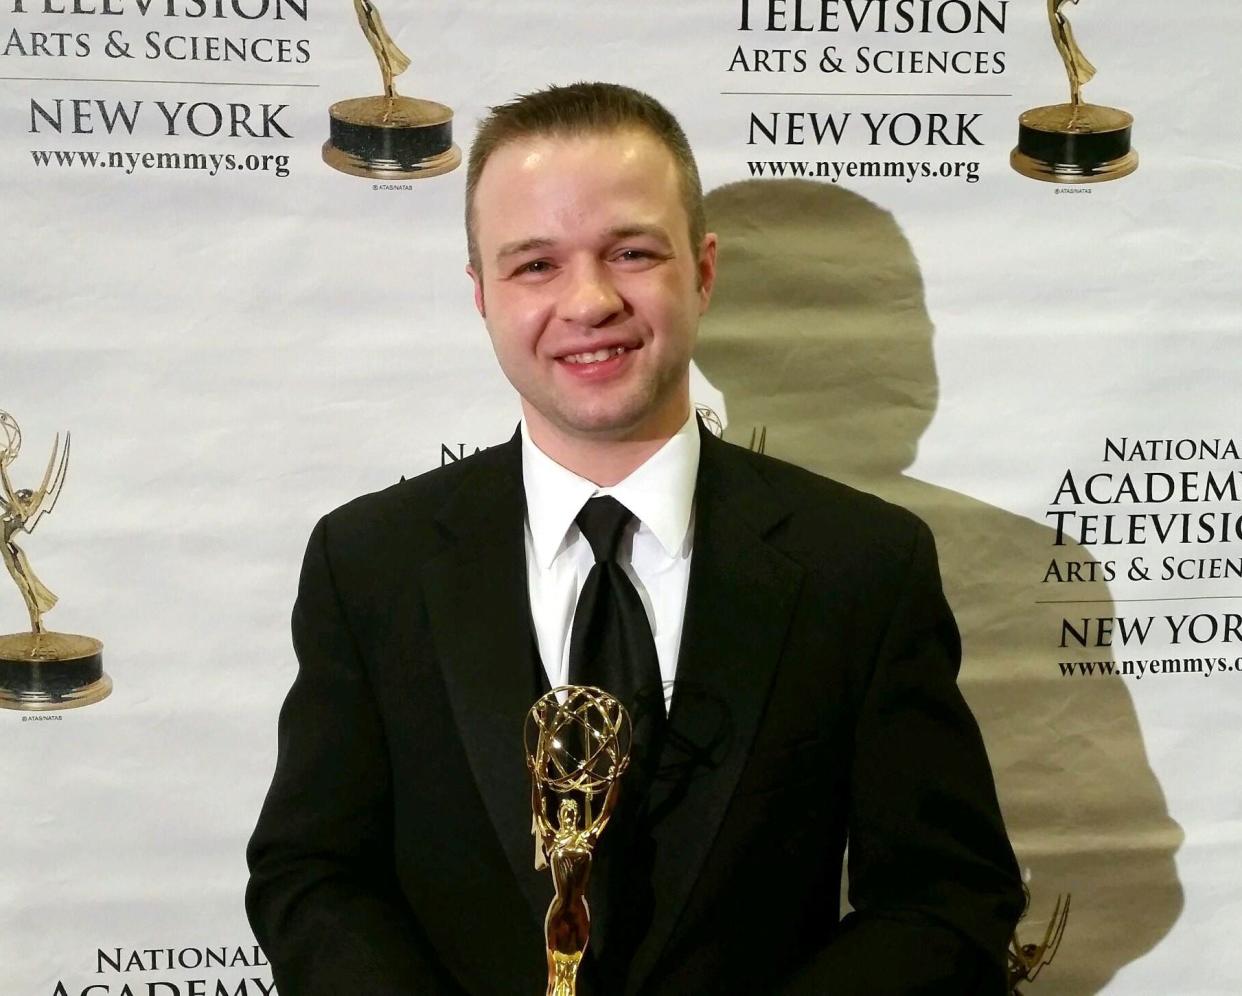 Andy Malnoske after receiving his Emmy Award on May 2 in New York City.